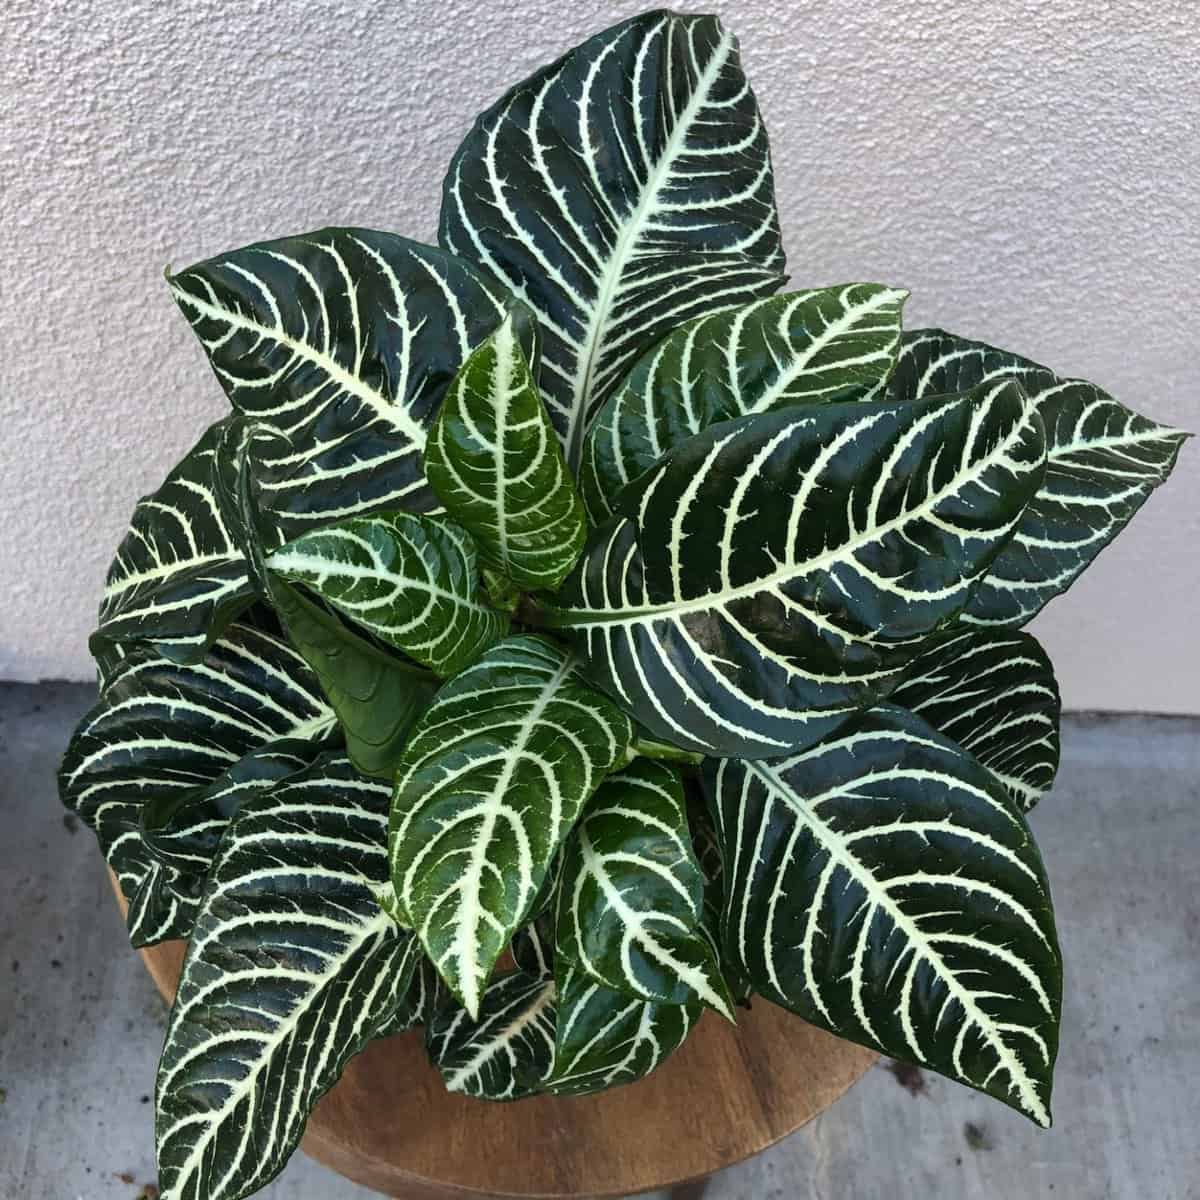 How To Take Care of Your Zebra Plant - Paisley Plants